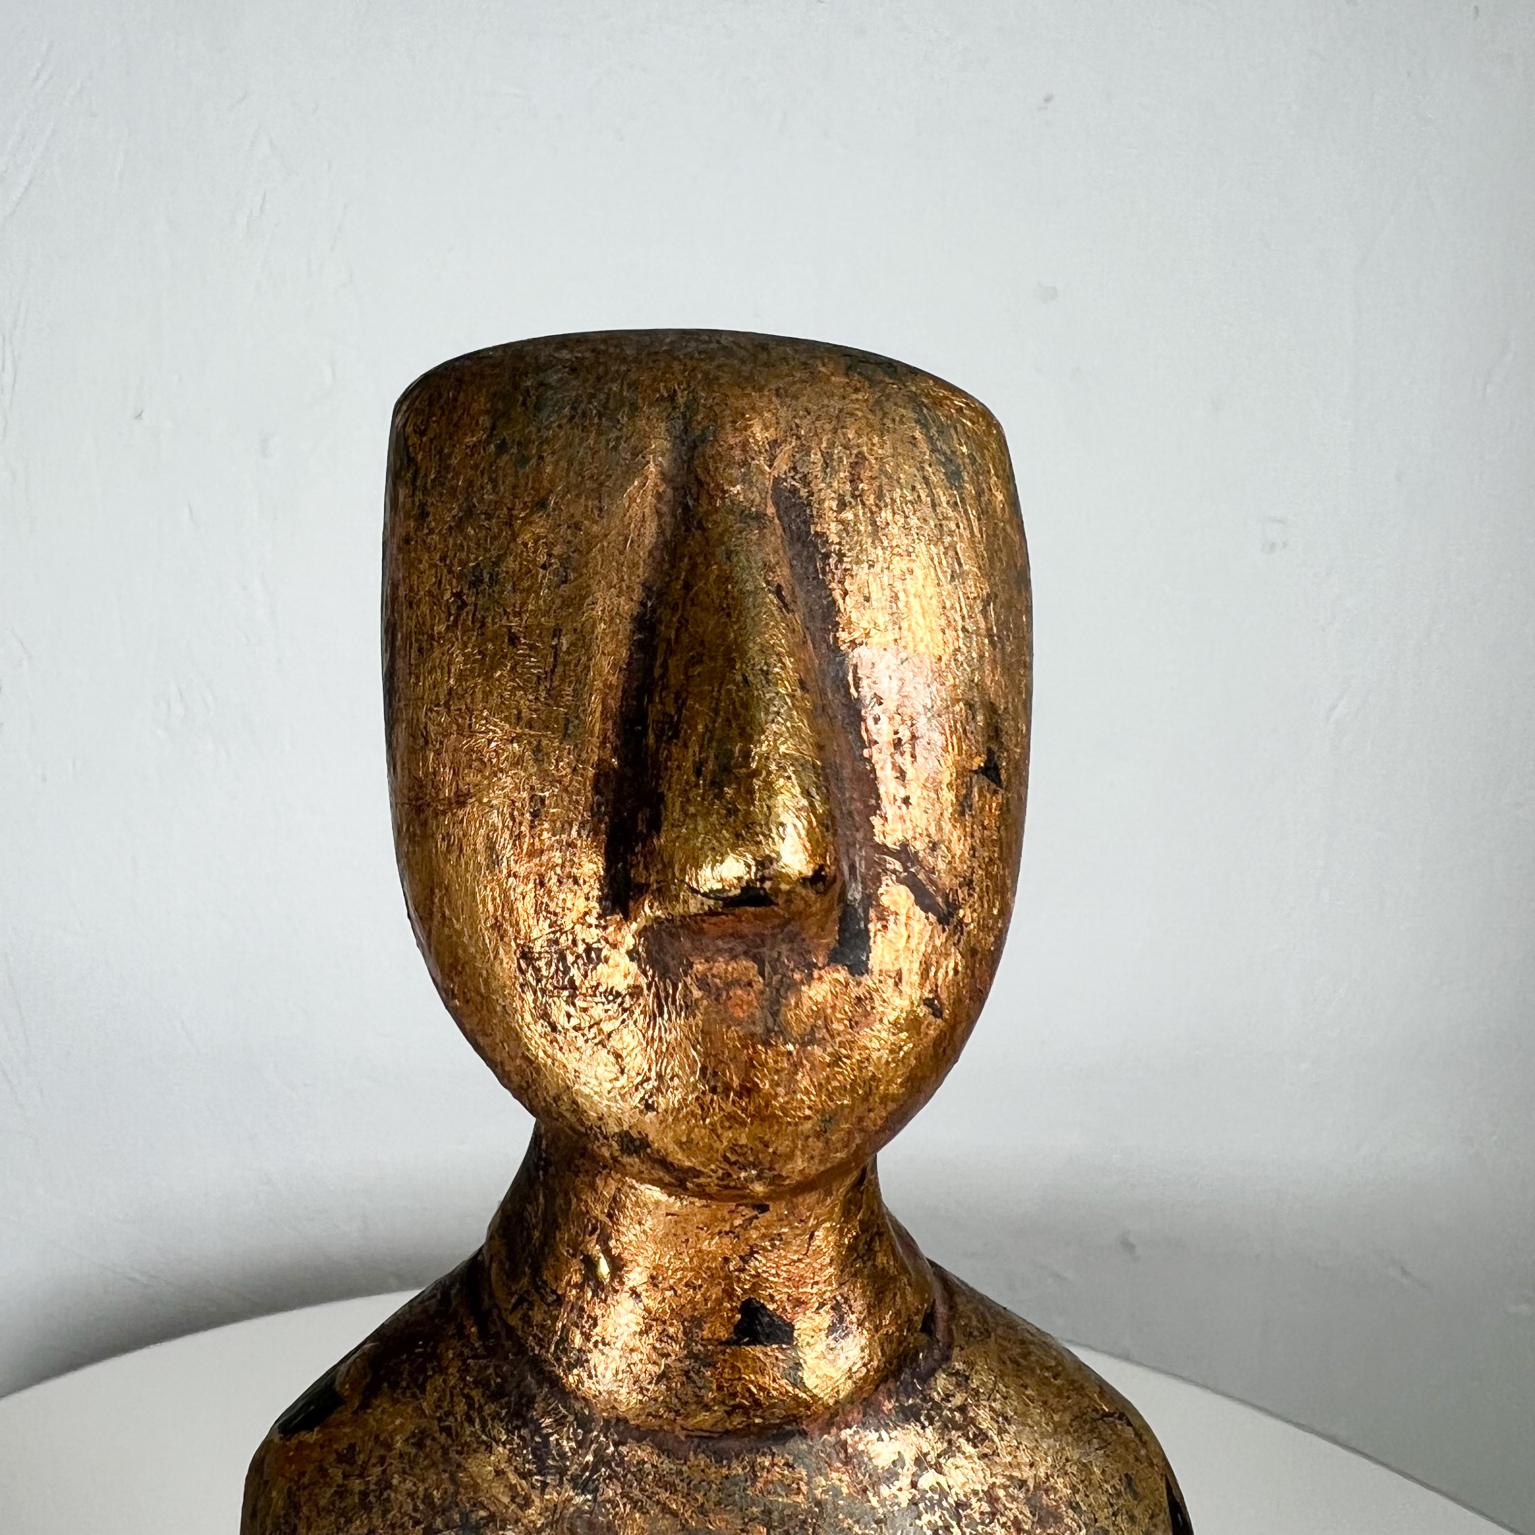 Art Sculpture Golden Oscar Cycladic Figurine.
Maesures: 11.88 tall x 3.5 width x 2 depth.
Preowned original vintage condition.
Refer to images provided.
 